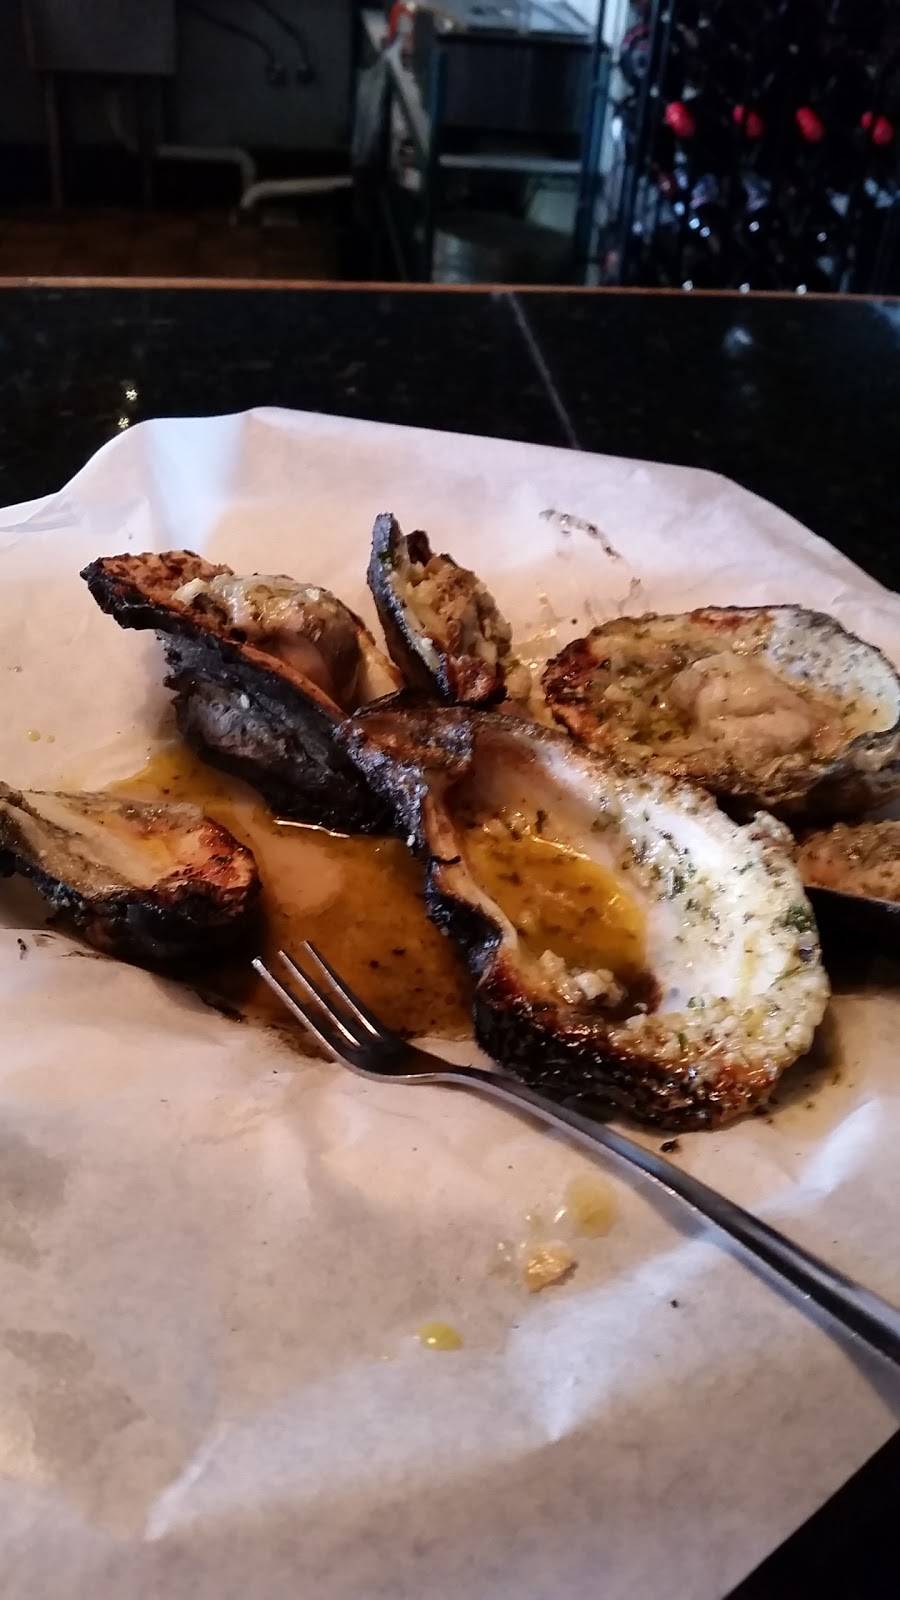 Full Moon Oyster Bar - Clemmons | 1473 River Ridge Dr, Clemmons, NC 27012, USA | Phone: (336) 712-8200